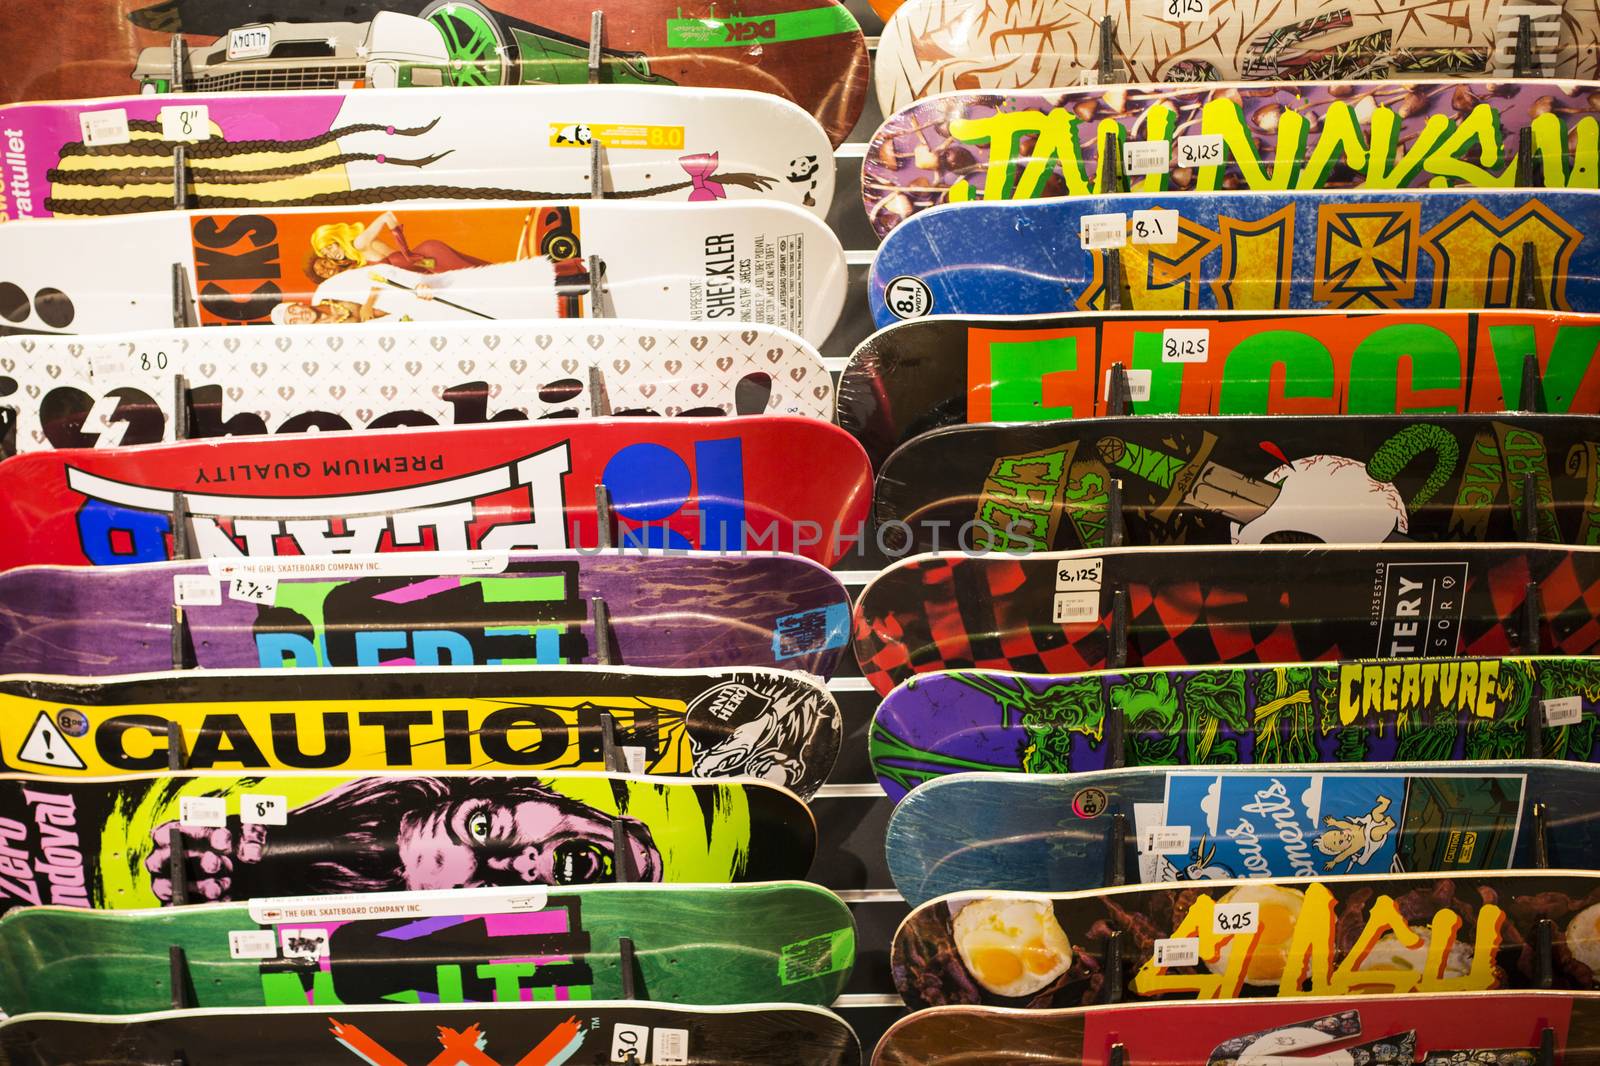 Collection of Colourful Skate Boards in a Store Display by Whiteboxmedia